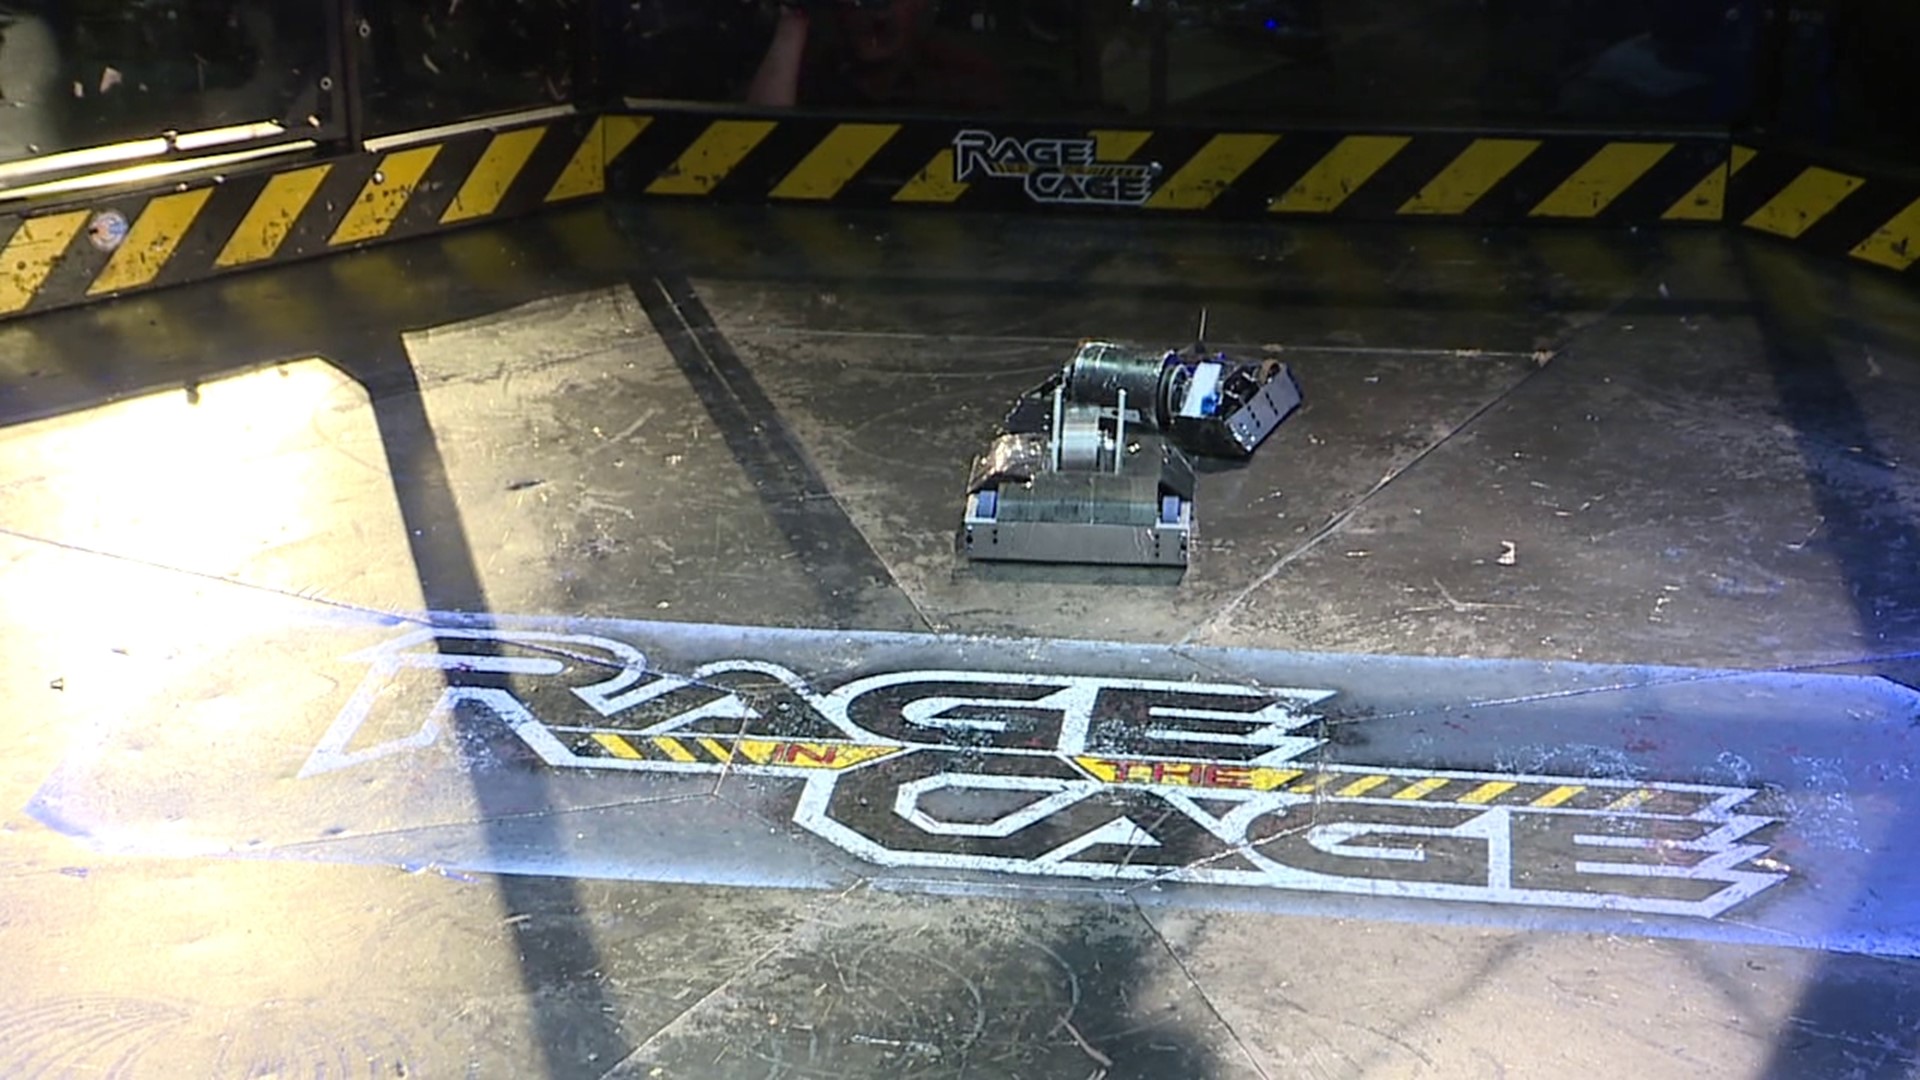 Saturday marked the 11th Annual Rage in the Cage Robotics tournament at Bloomsburg Area High School.